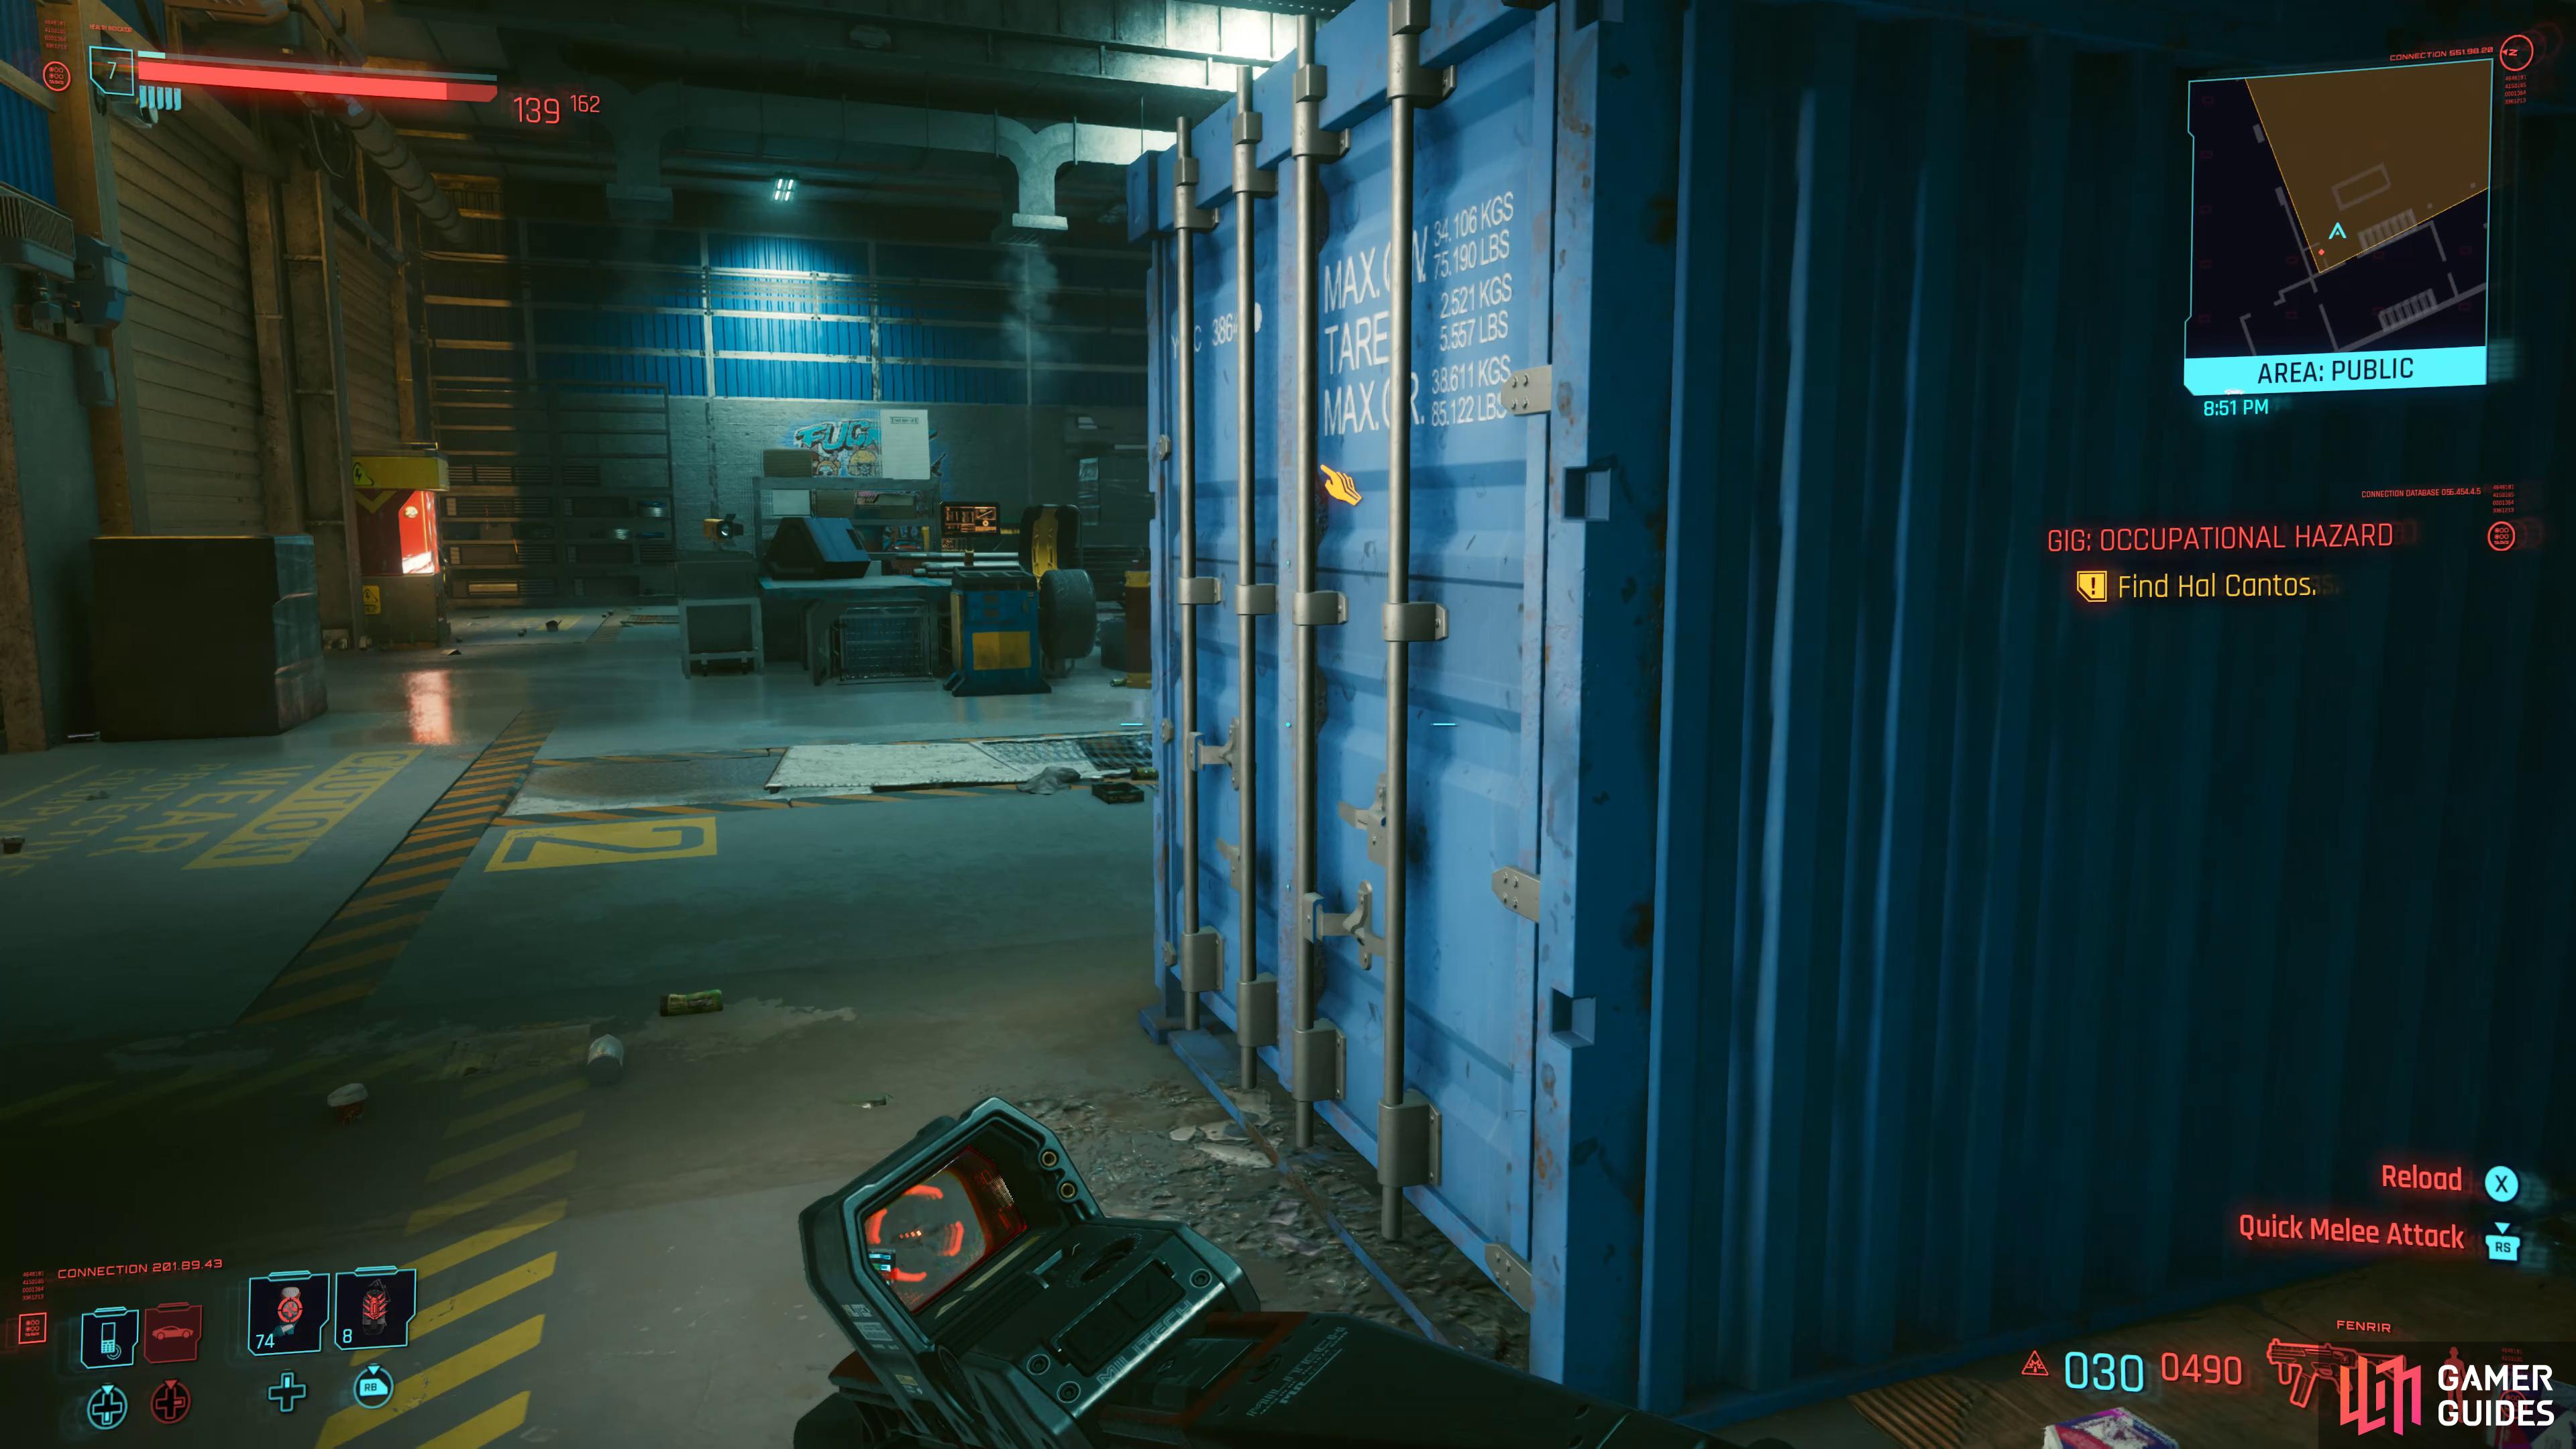 let Hal out of the cargo container once the area is clear.